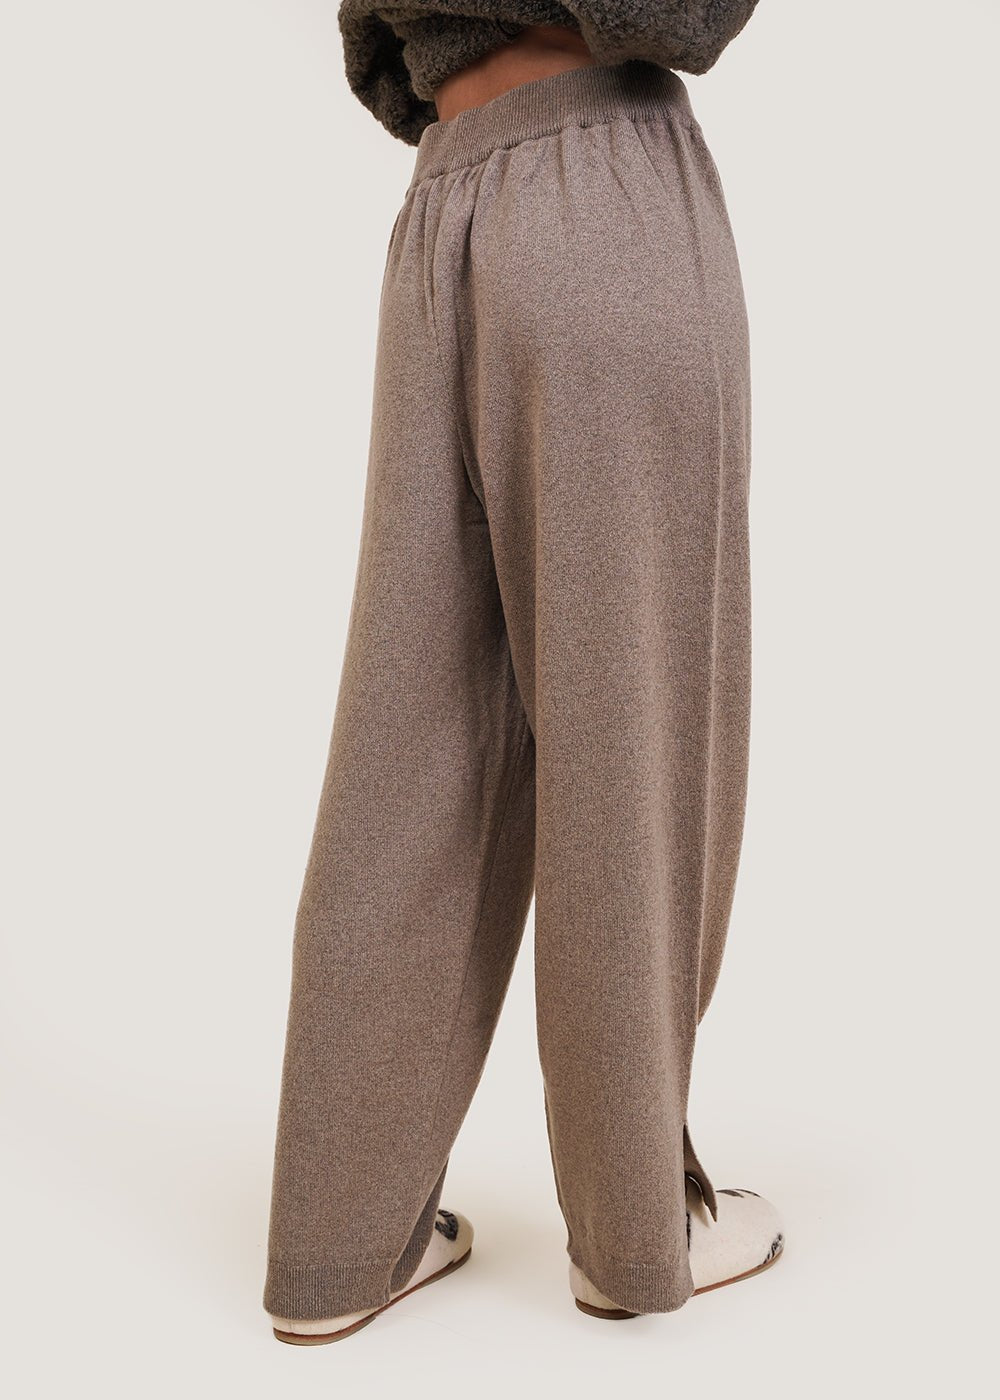 https://newclassics.ca/cdn/shop/products/cordera-taupe-cashmere-knit-pants-new-classics-studios-sustainable-and-ethical-fashion-canada-831977_1000x.jpg?v=1687282381